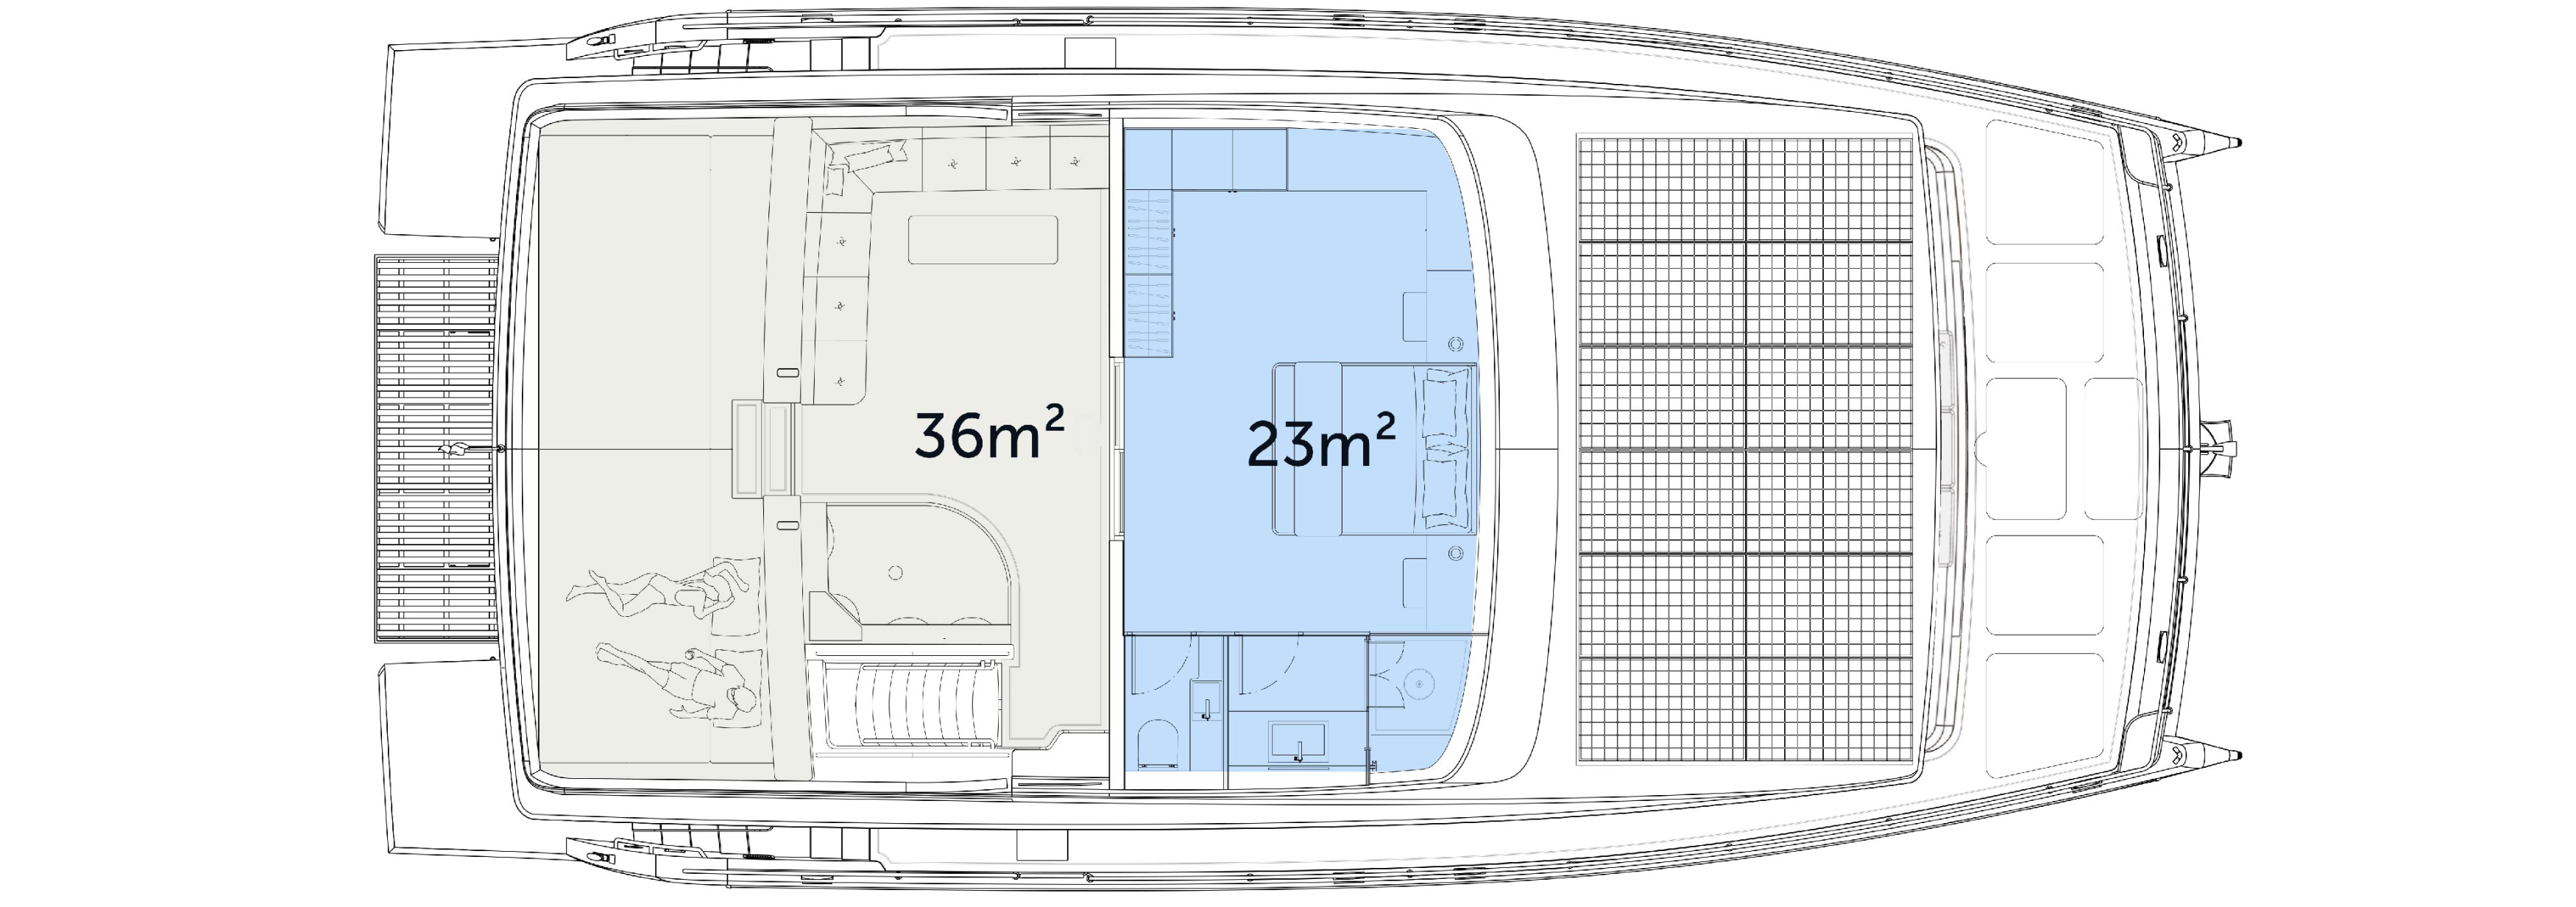 Yacht 3 deck closed area plan